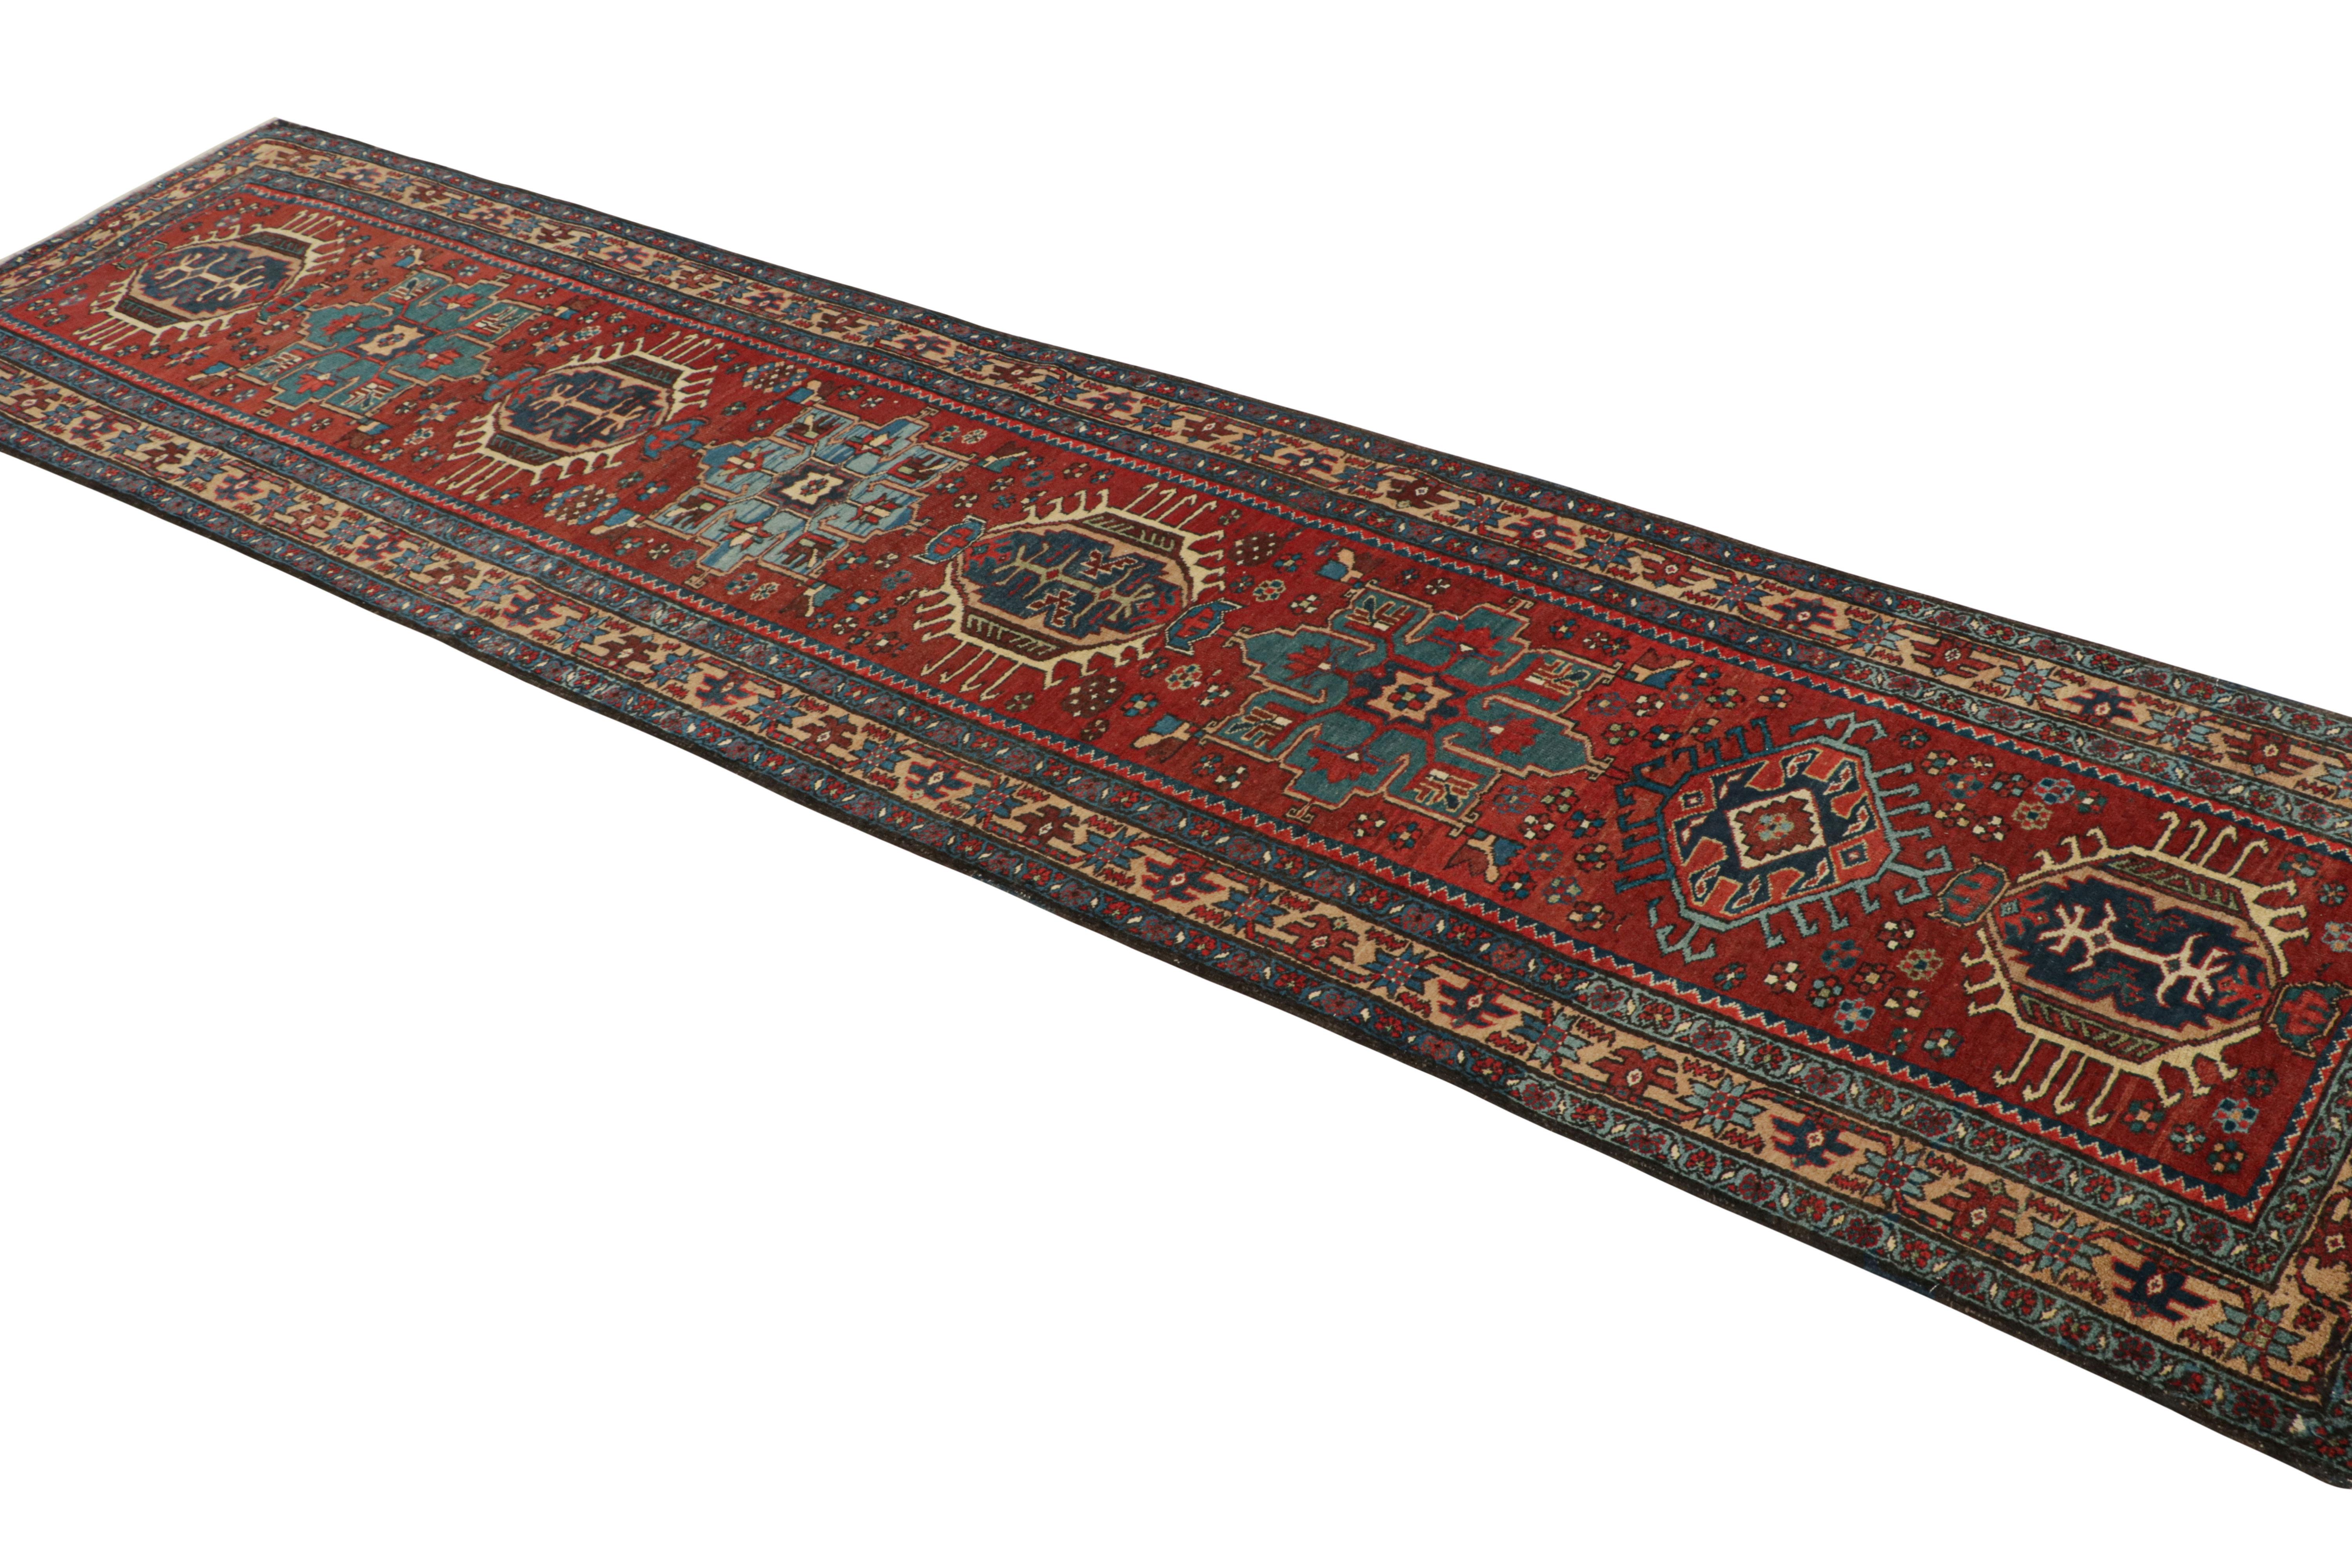 Irish Antique Arraiolos Needlepoint Runner with Floral Medallions, from Rug & Kilim For Sale